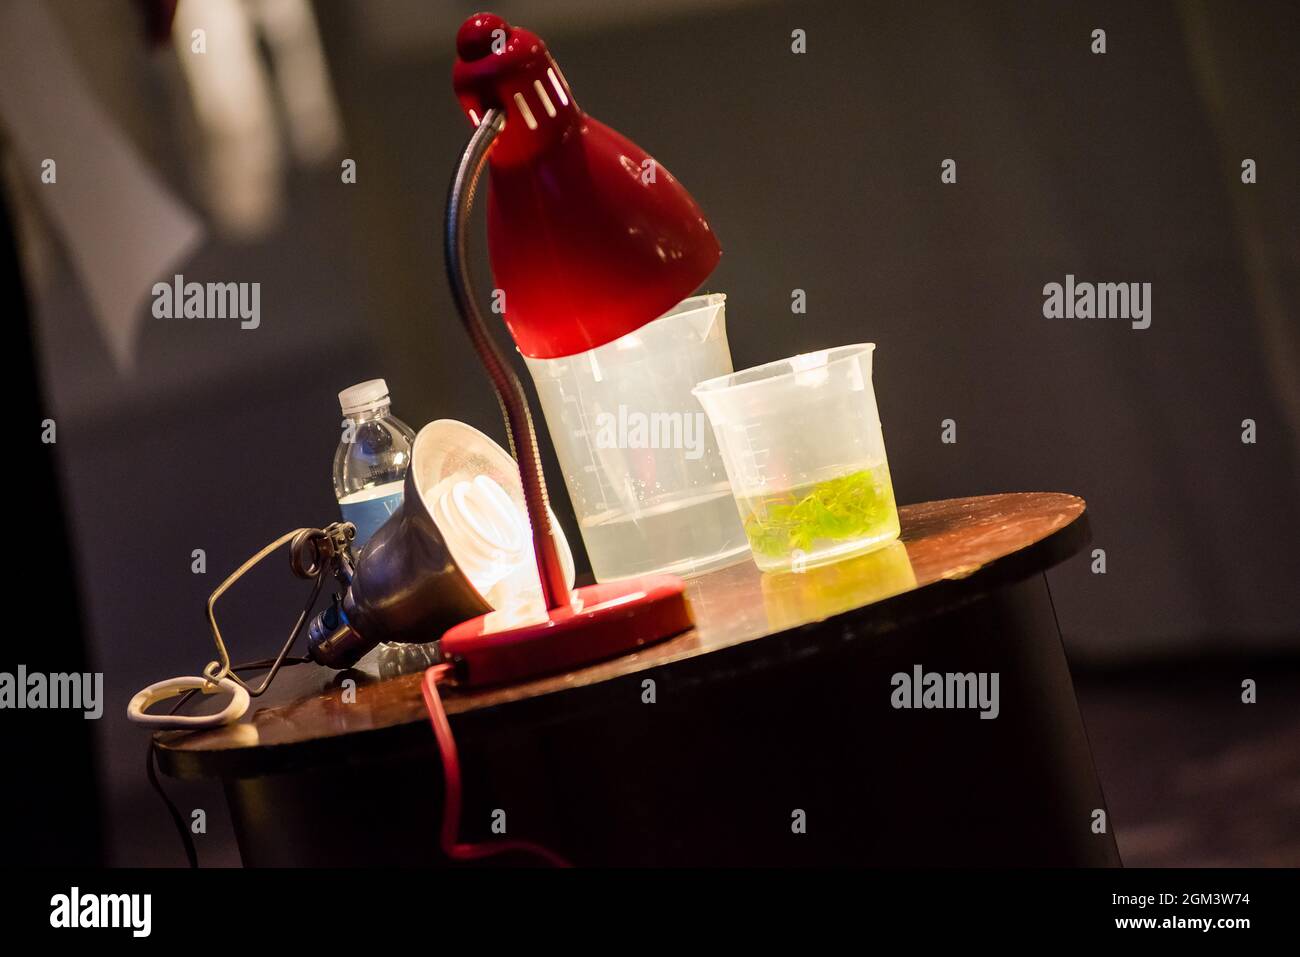 Science experiment materials including colorful green liquid filled cup. Stock Photo